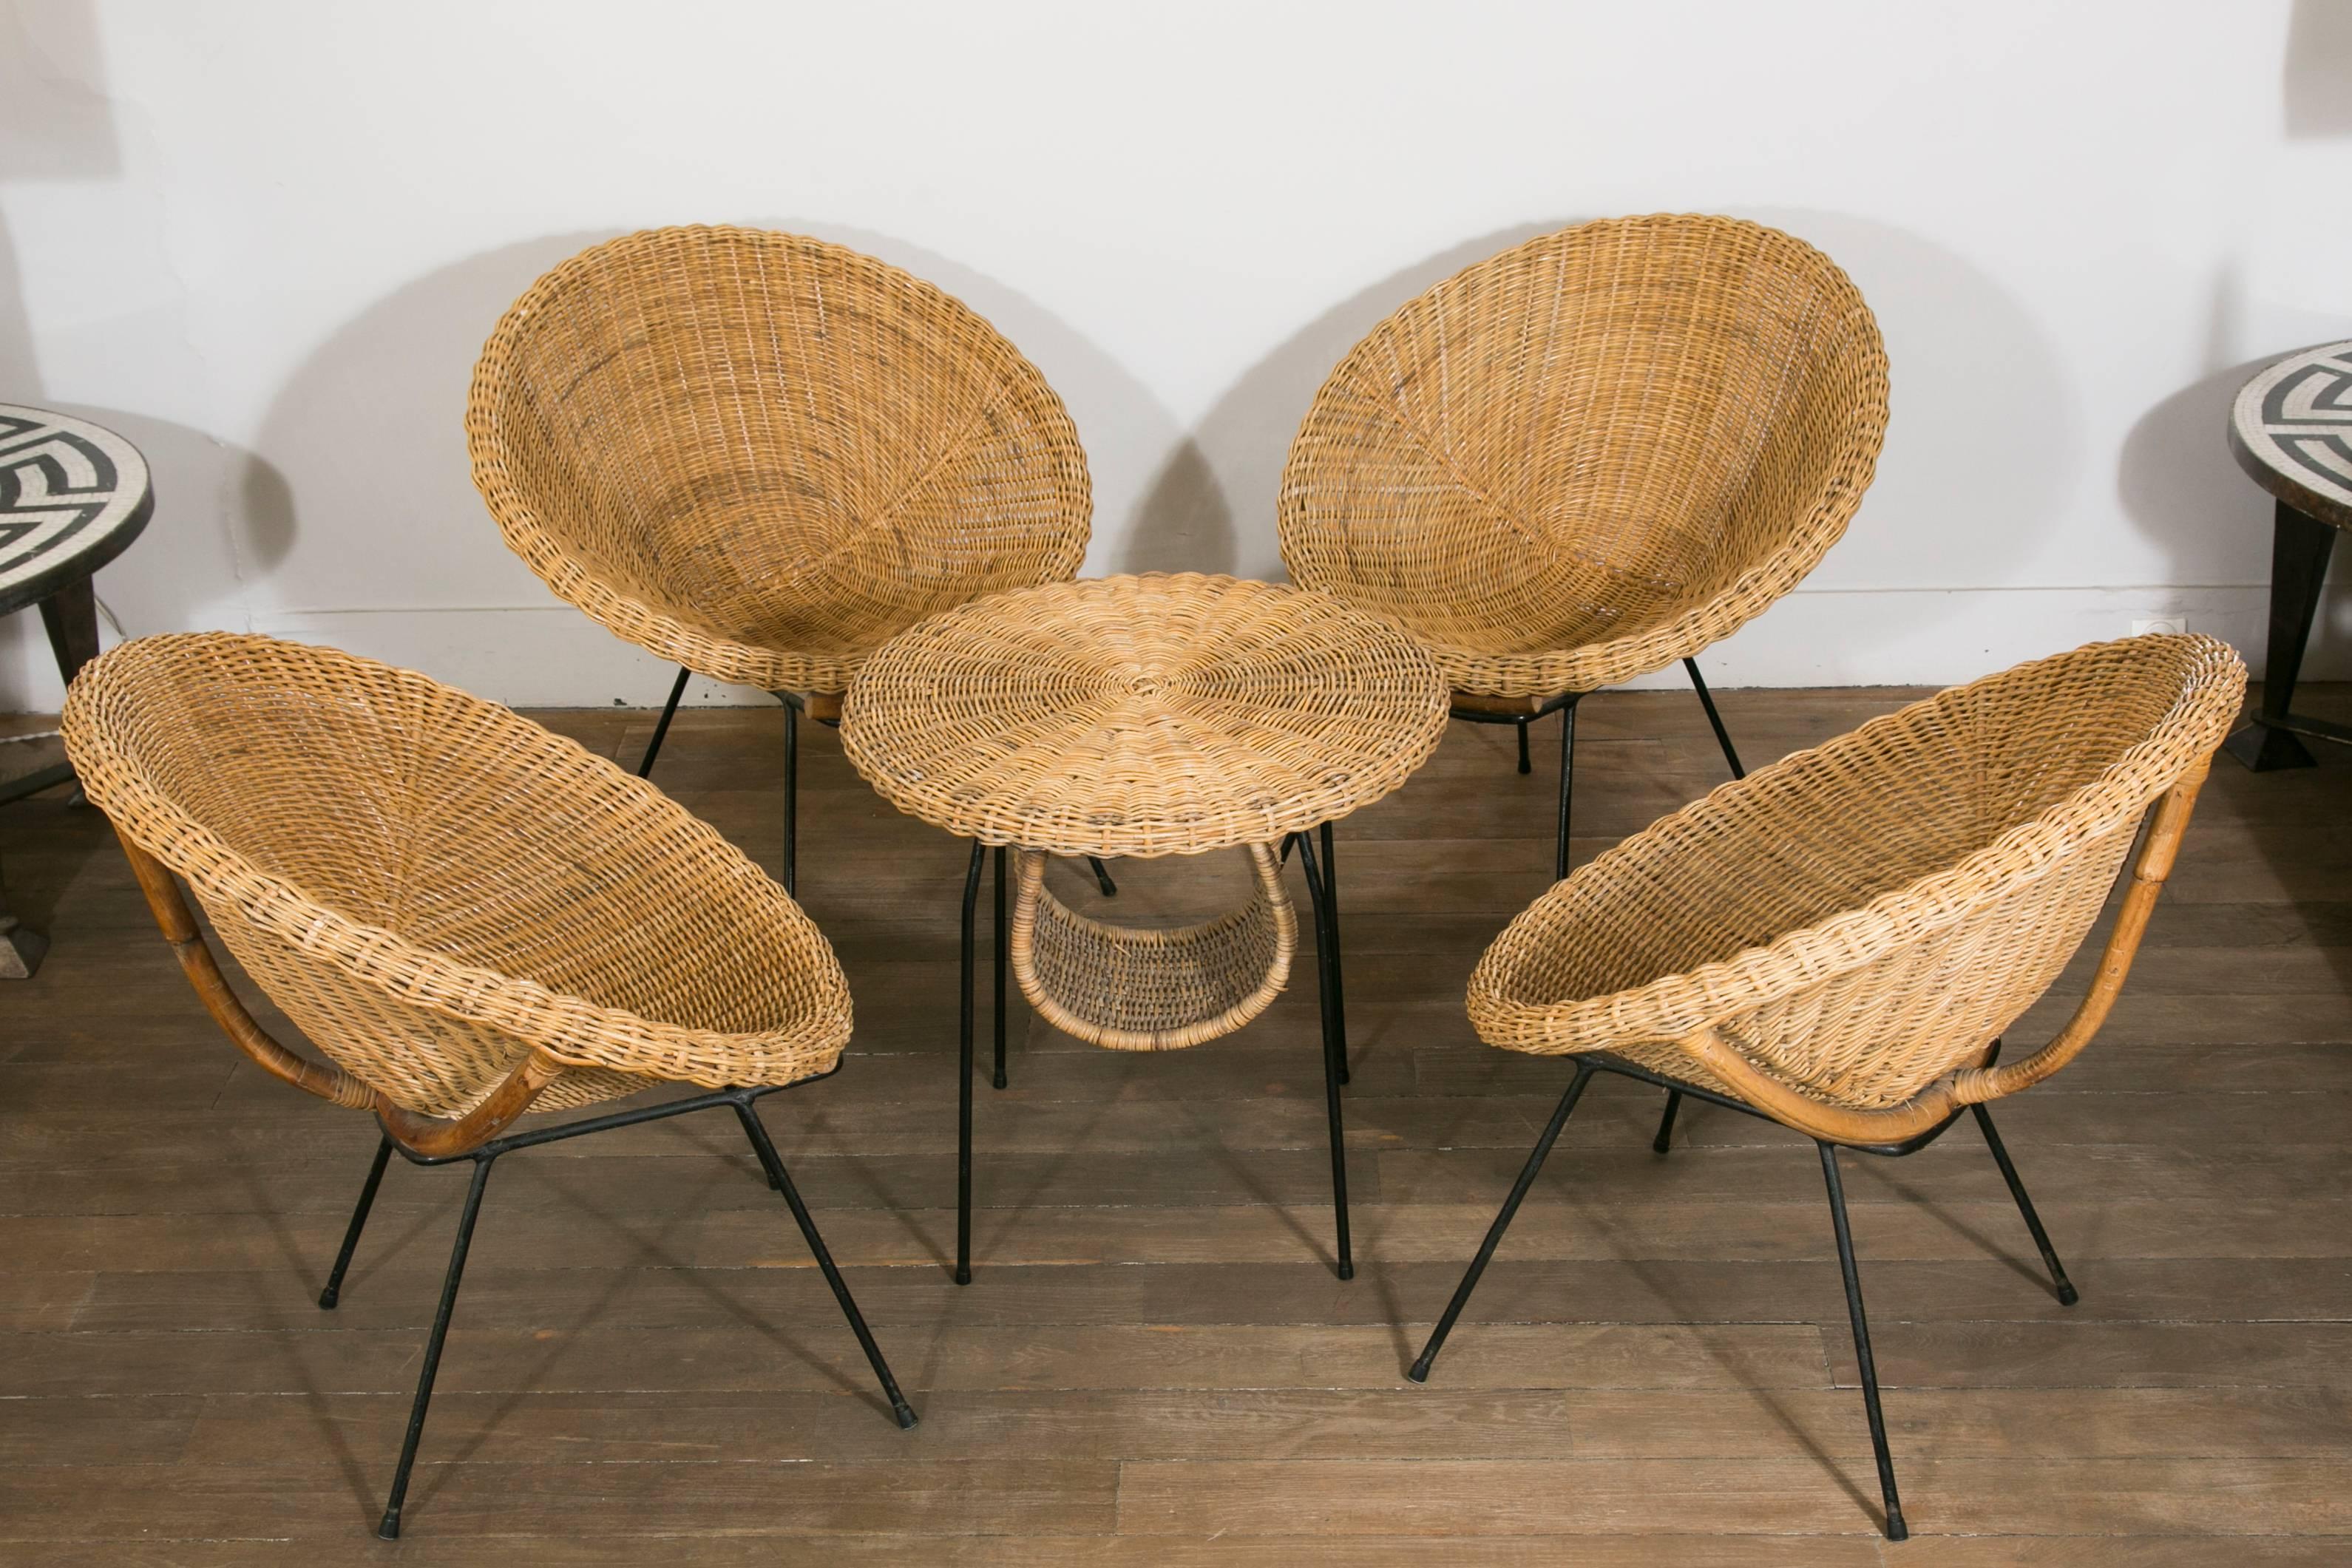 Rattan and bamboo set of four scoop chairs and one magazine table.
Lacquered metal feet.
In the style of Janine Abraham.

France, 1960s.
 Chairs dimensions:
Height 28.3 in.
Width 25.2 in. 
Depth 28.3 in. 
Heigtht seat 15.3 in.

Table